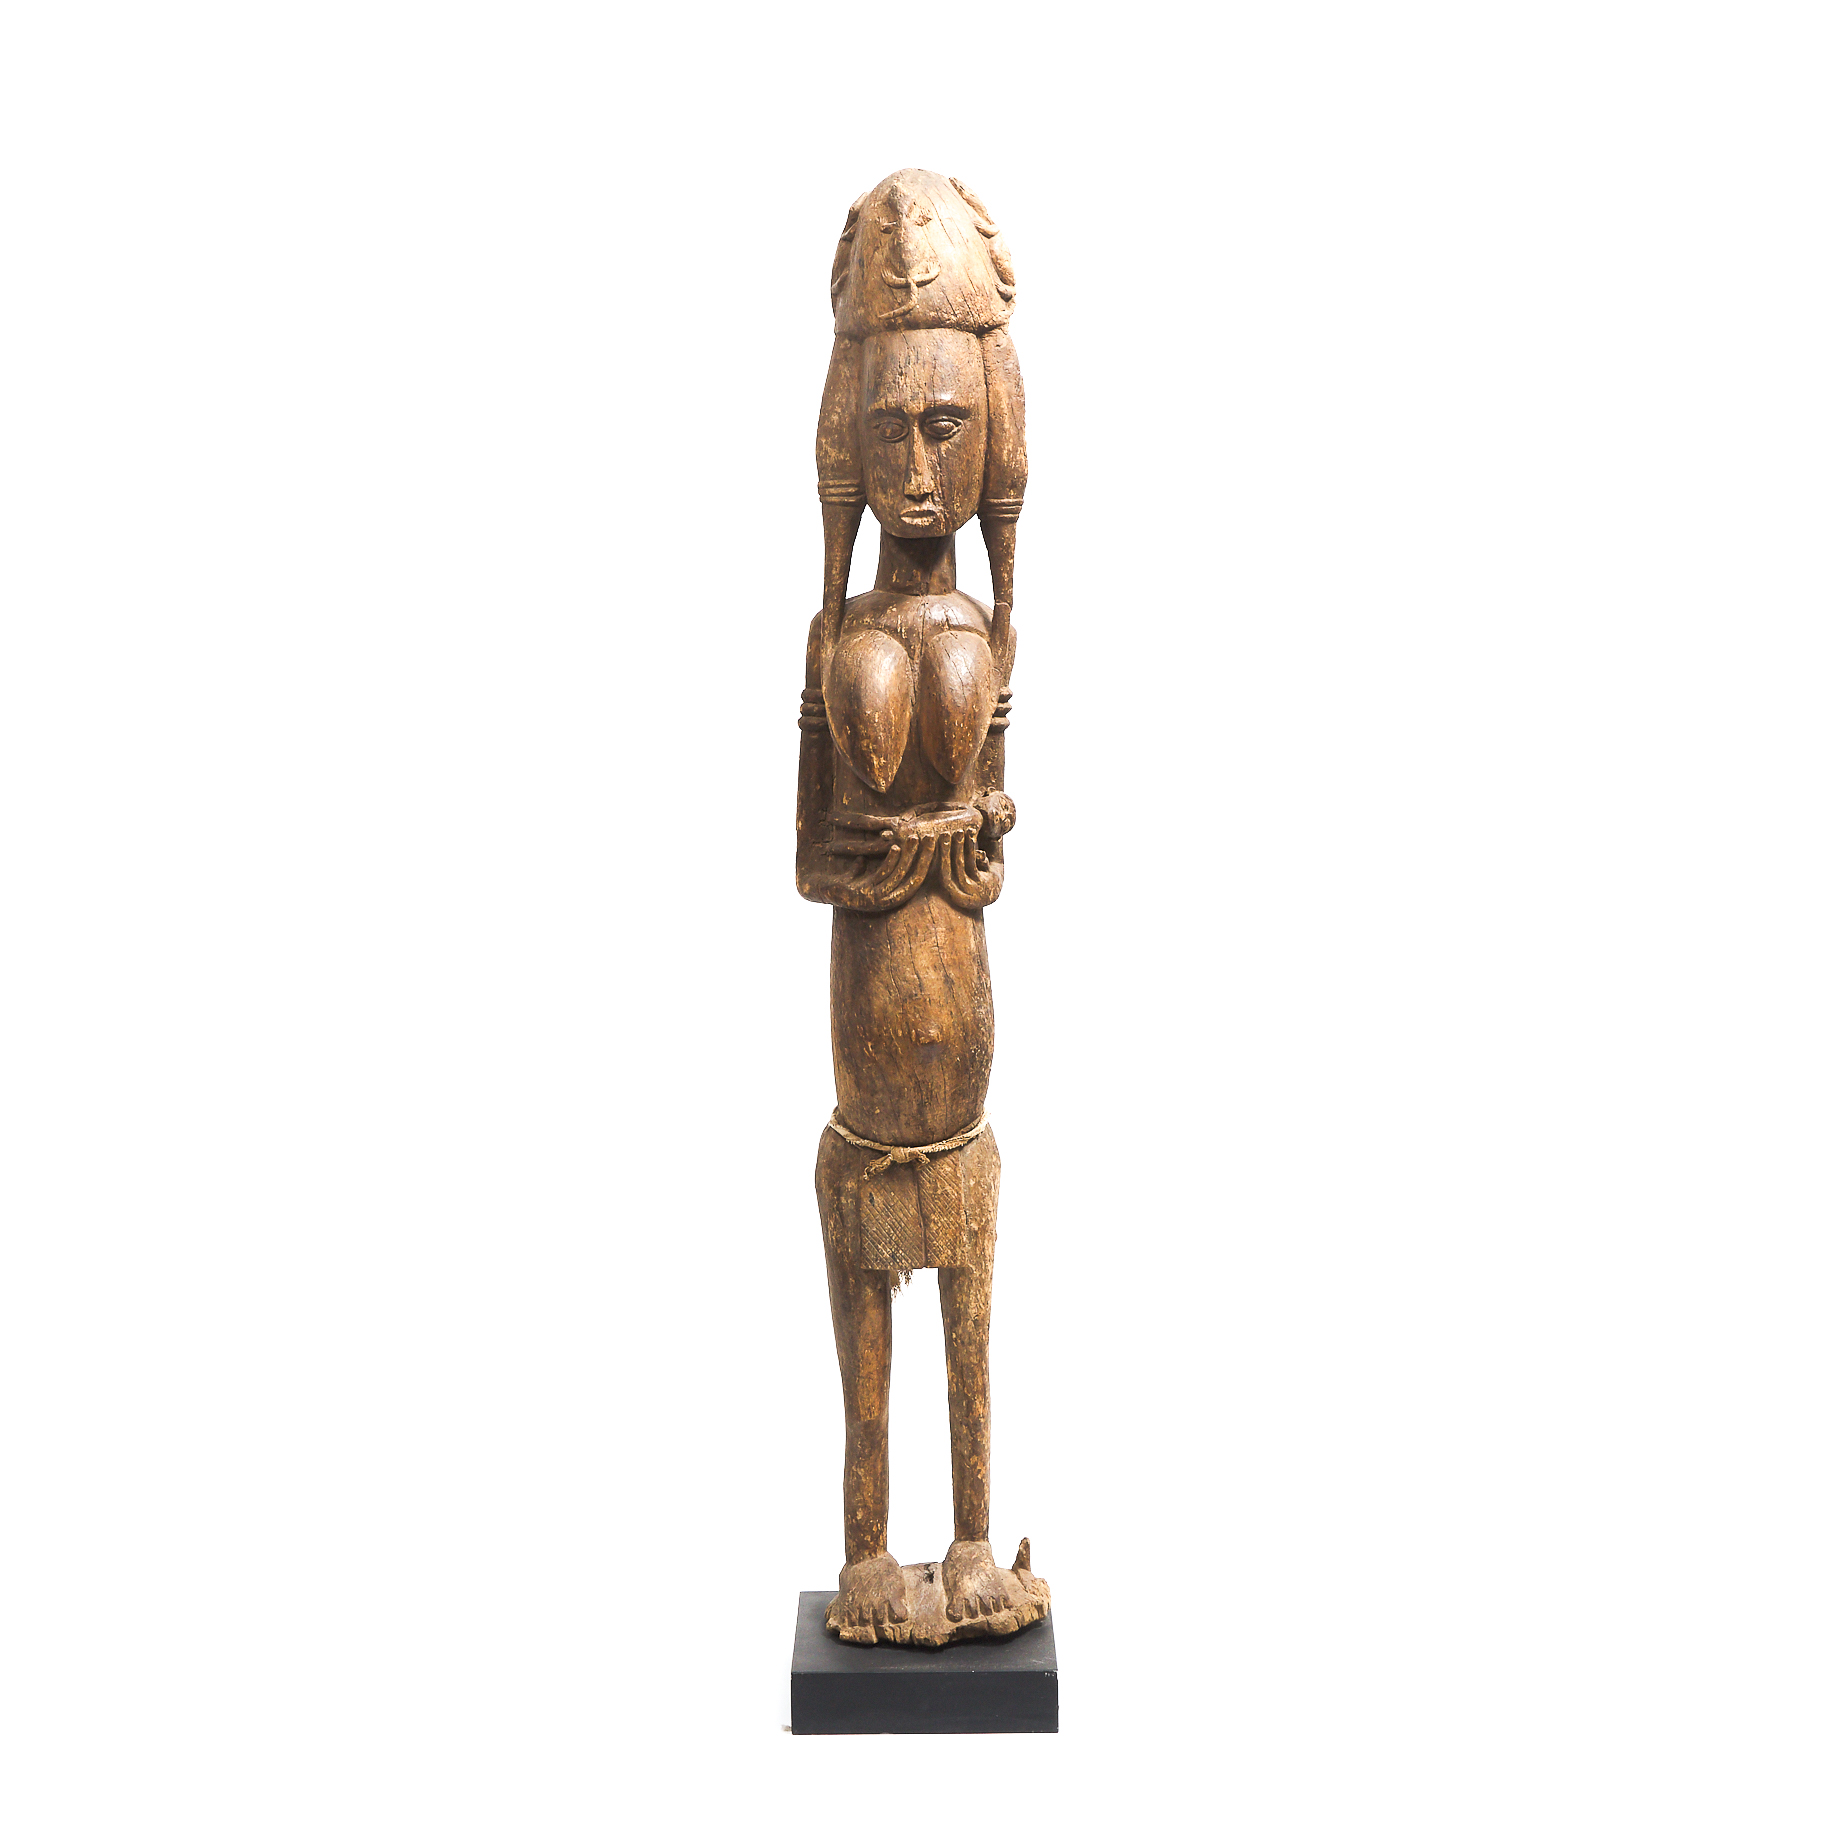 Bamana Maternity Figure, Mali, West Africa, early to mid 20th century